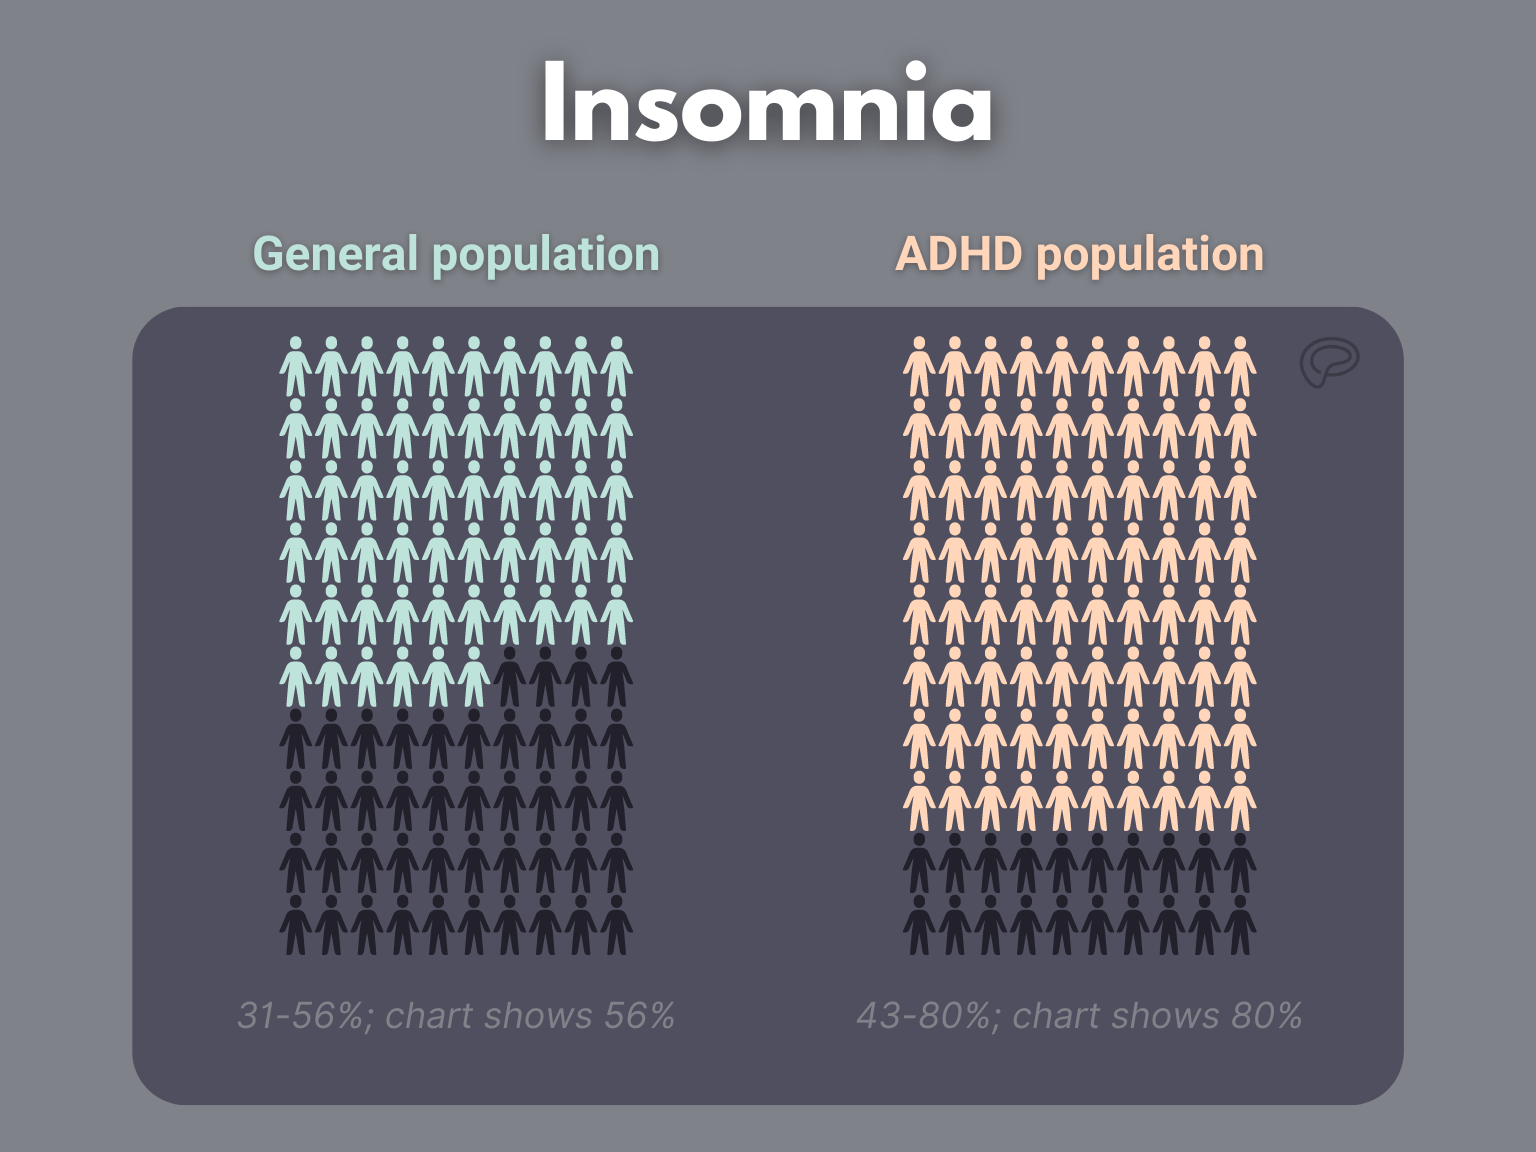 Visual representation of insomnia in the general population vs. the ADHD population. The left side shows 56/100 general population, and the right side shows 80/100